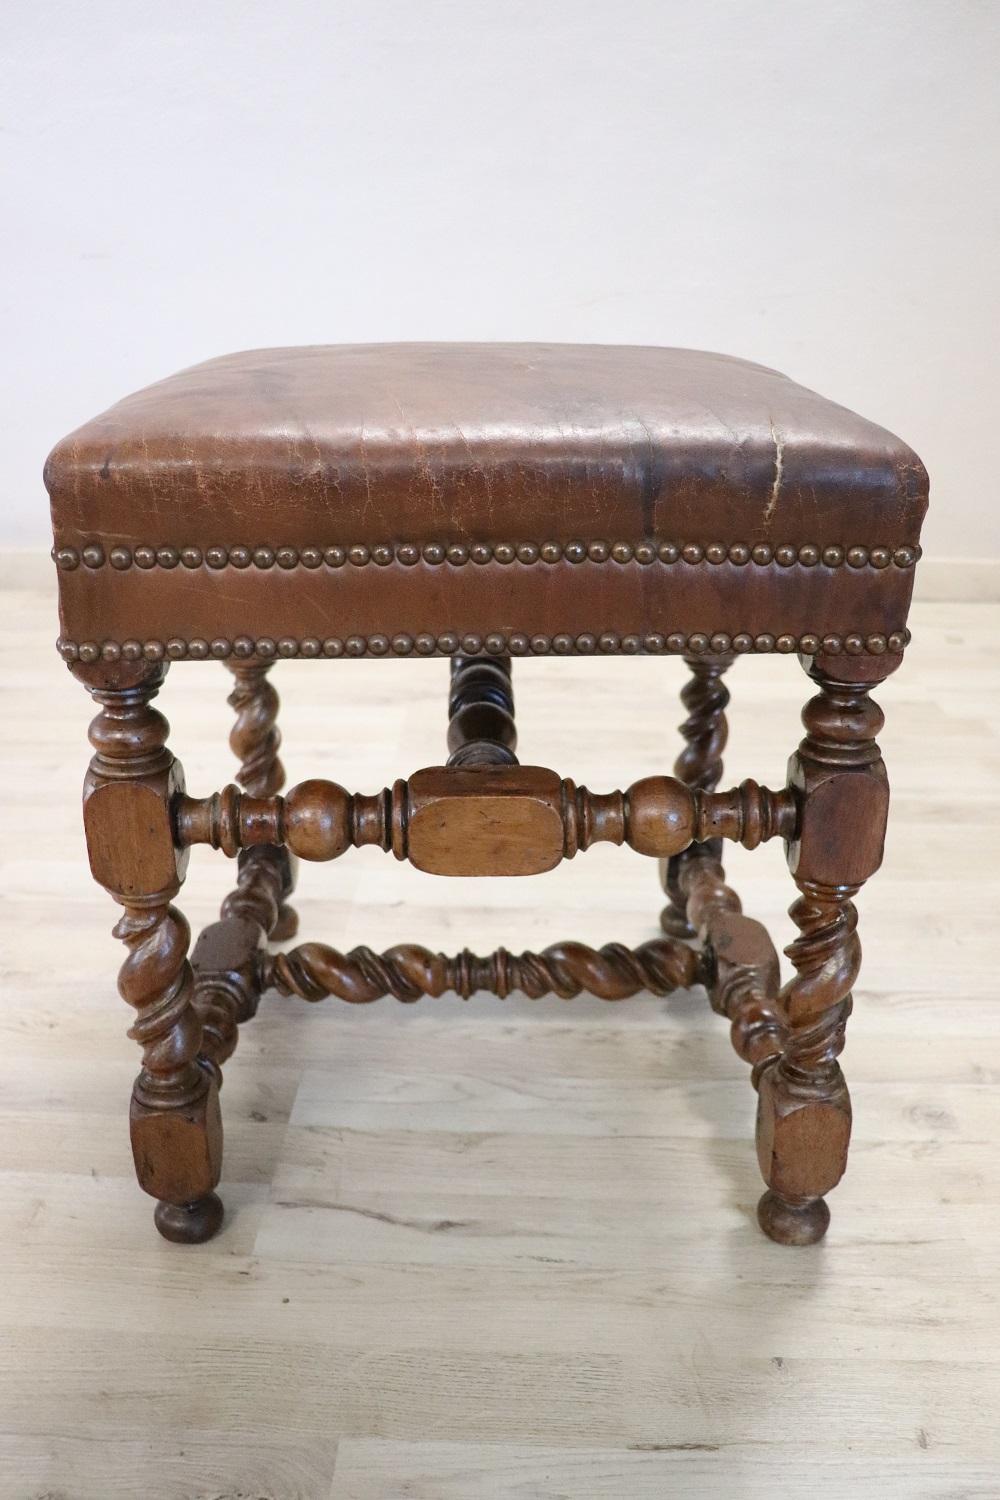 Beautiful and rare 18th century antique stool. Made of walnut wood with brown leather seat. Lovely turned walnut legs. Good condition to report some signs of wear in the leather.